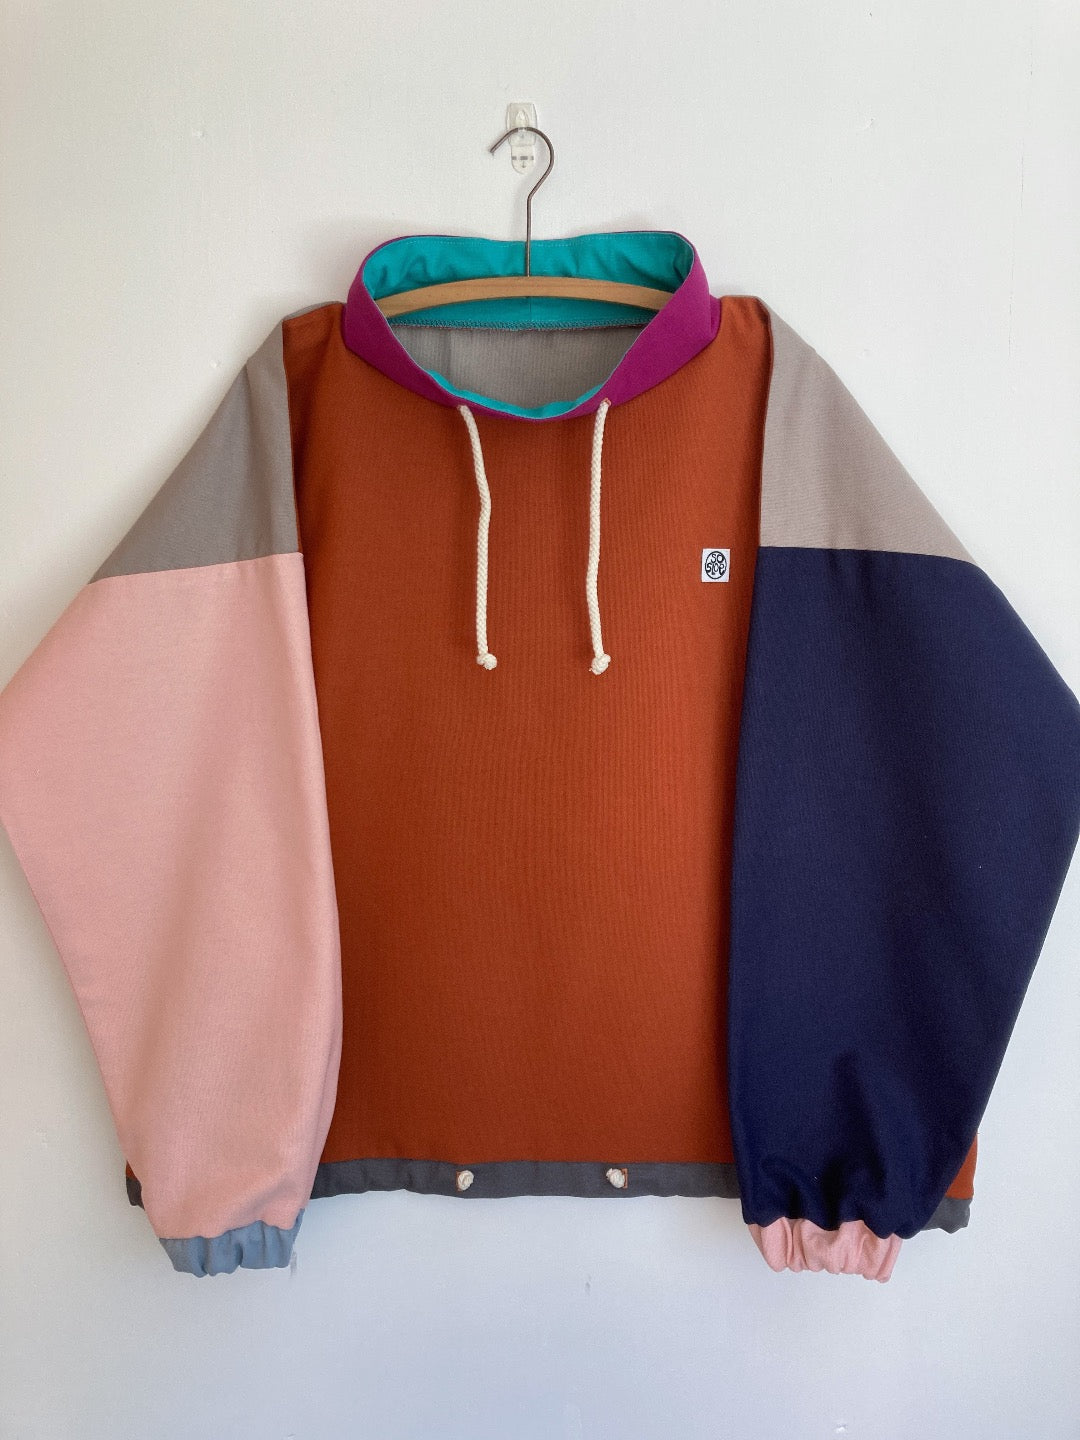 Cotton pullover in orange with one pale pink sleeve and one navy blue sleeve. Grey back panel and fuchsia pink collar with drawstring. 